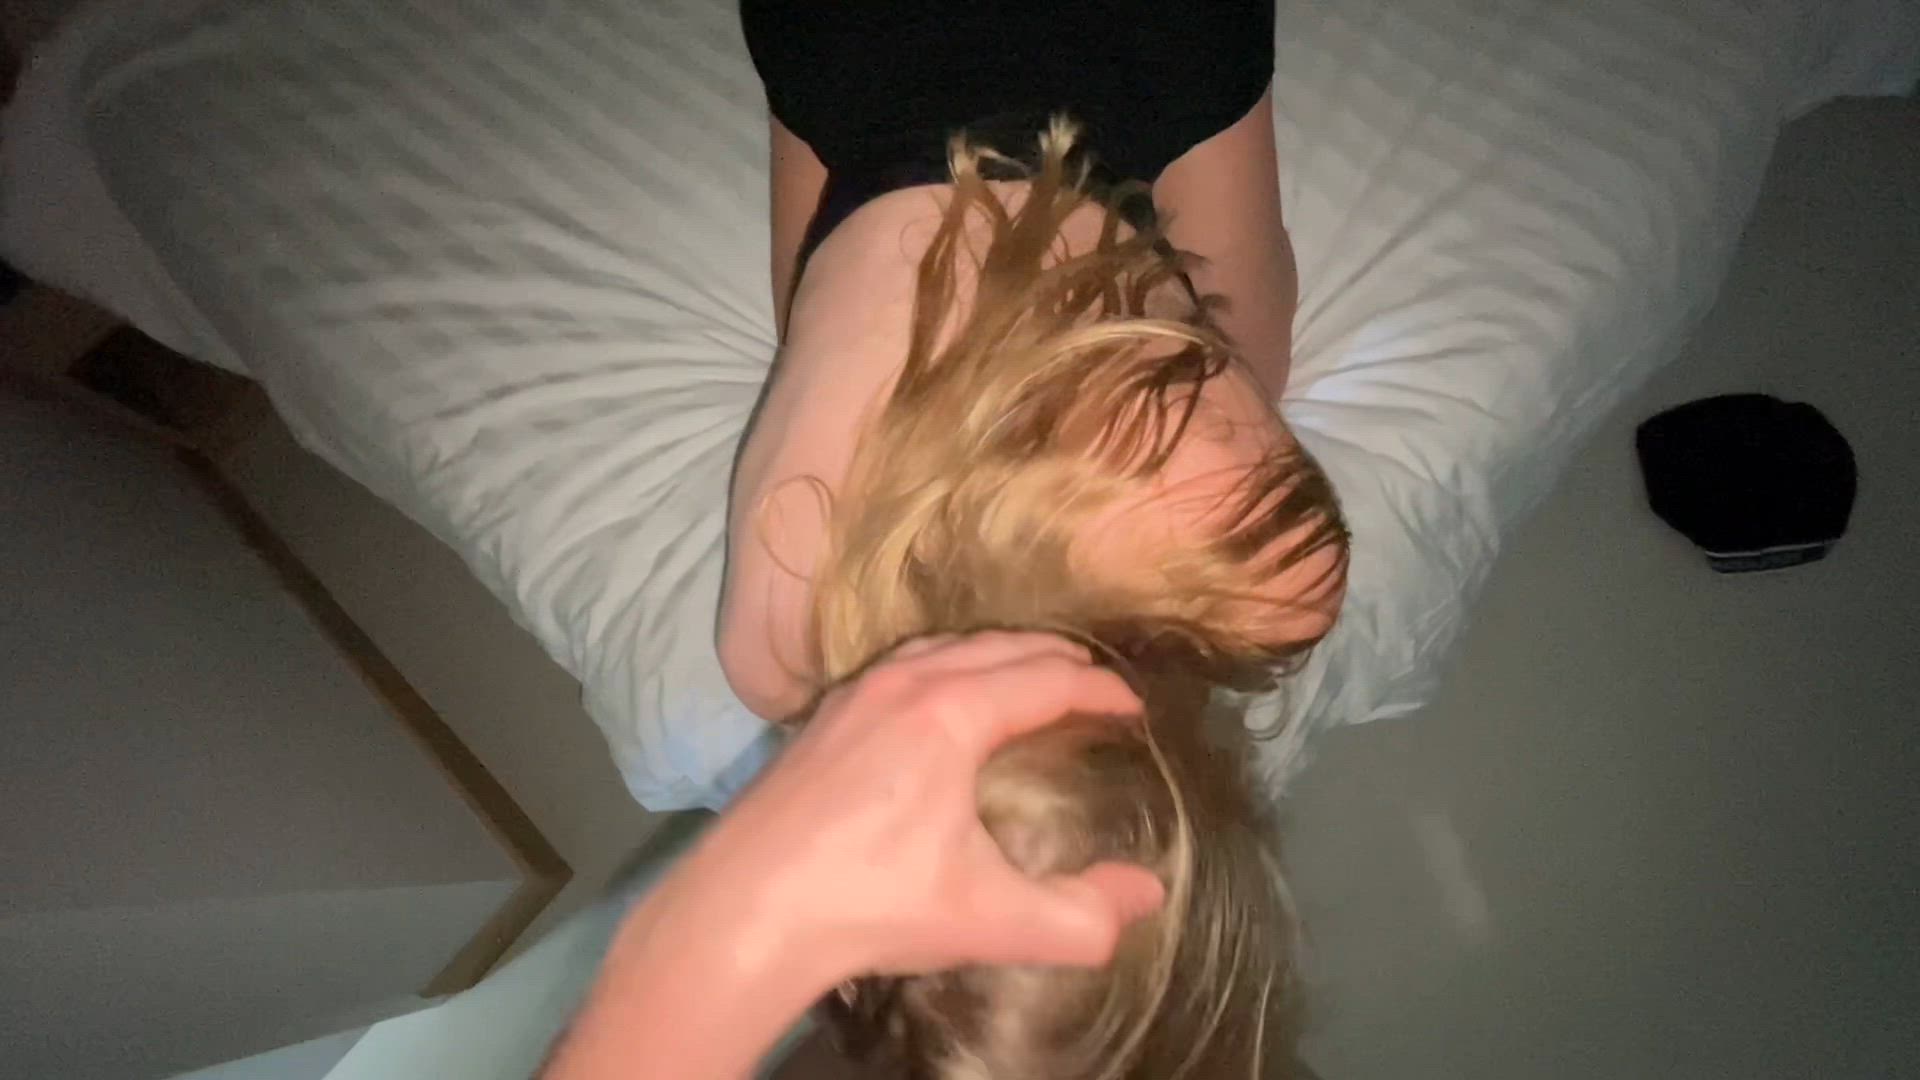 Amateur porn video with onlyfans model sophiababeee3 <strong>@sophiababeee3</strong>